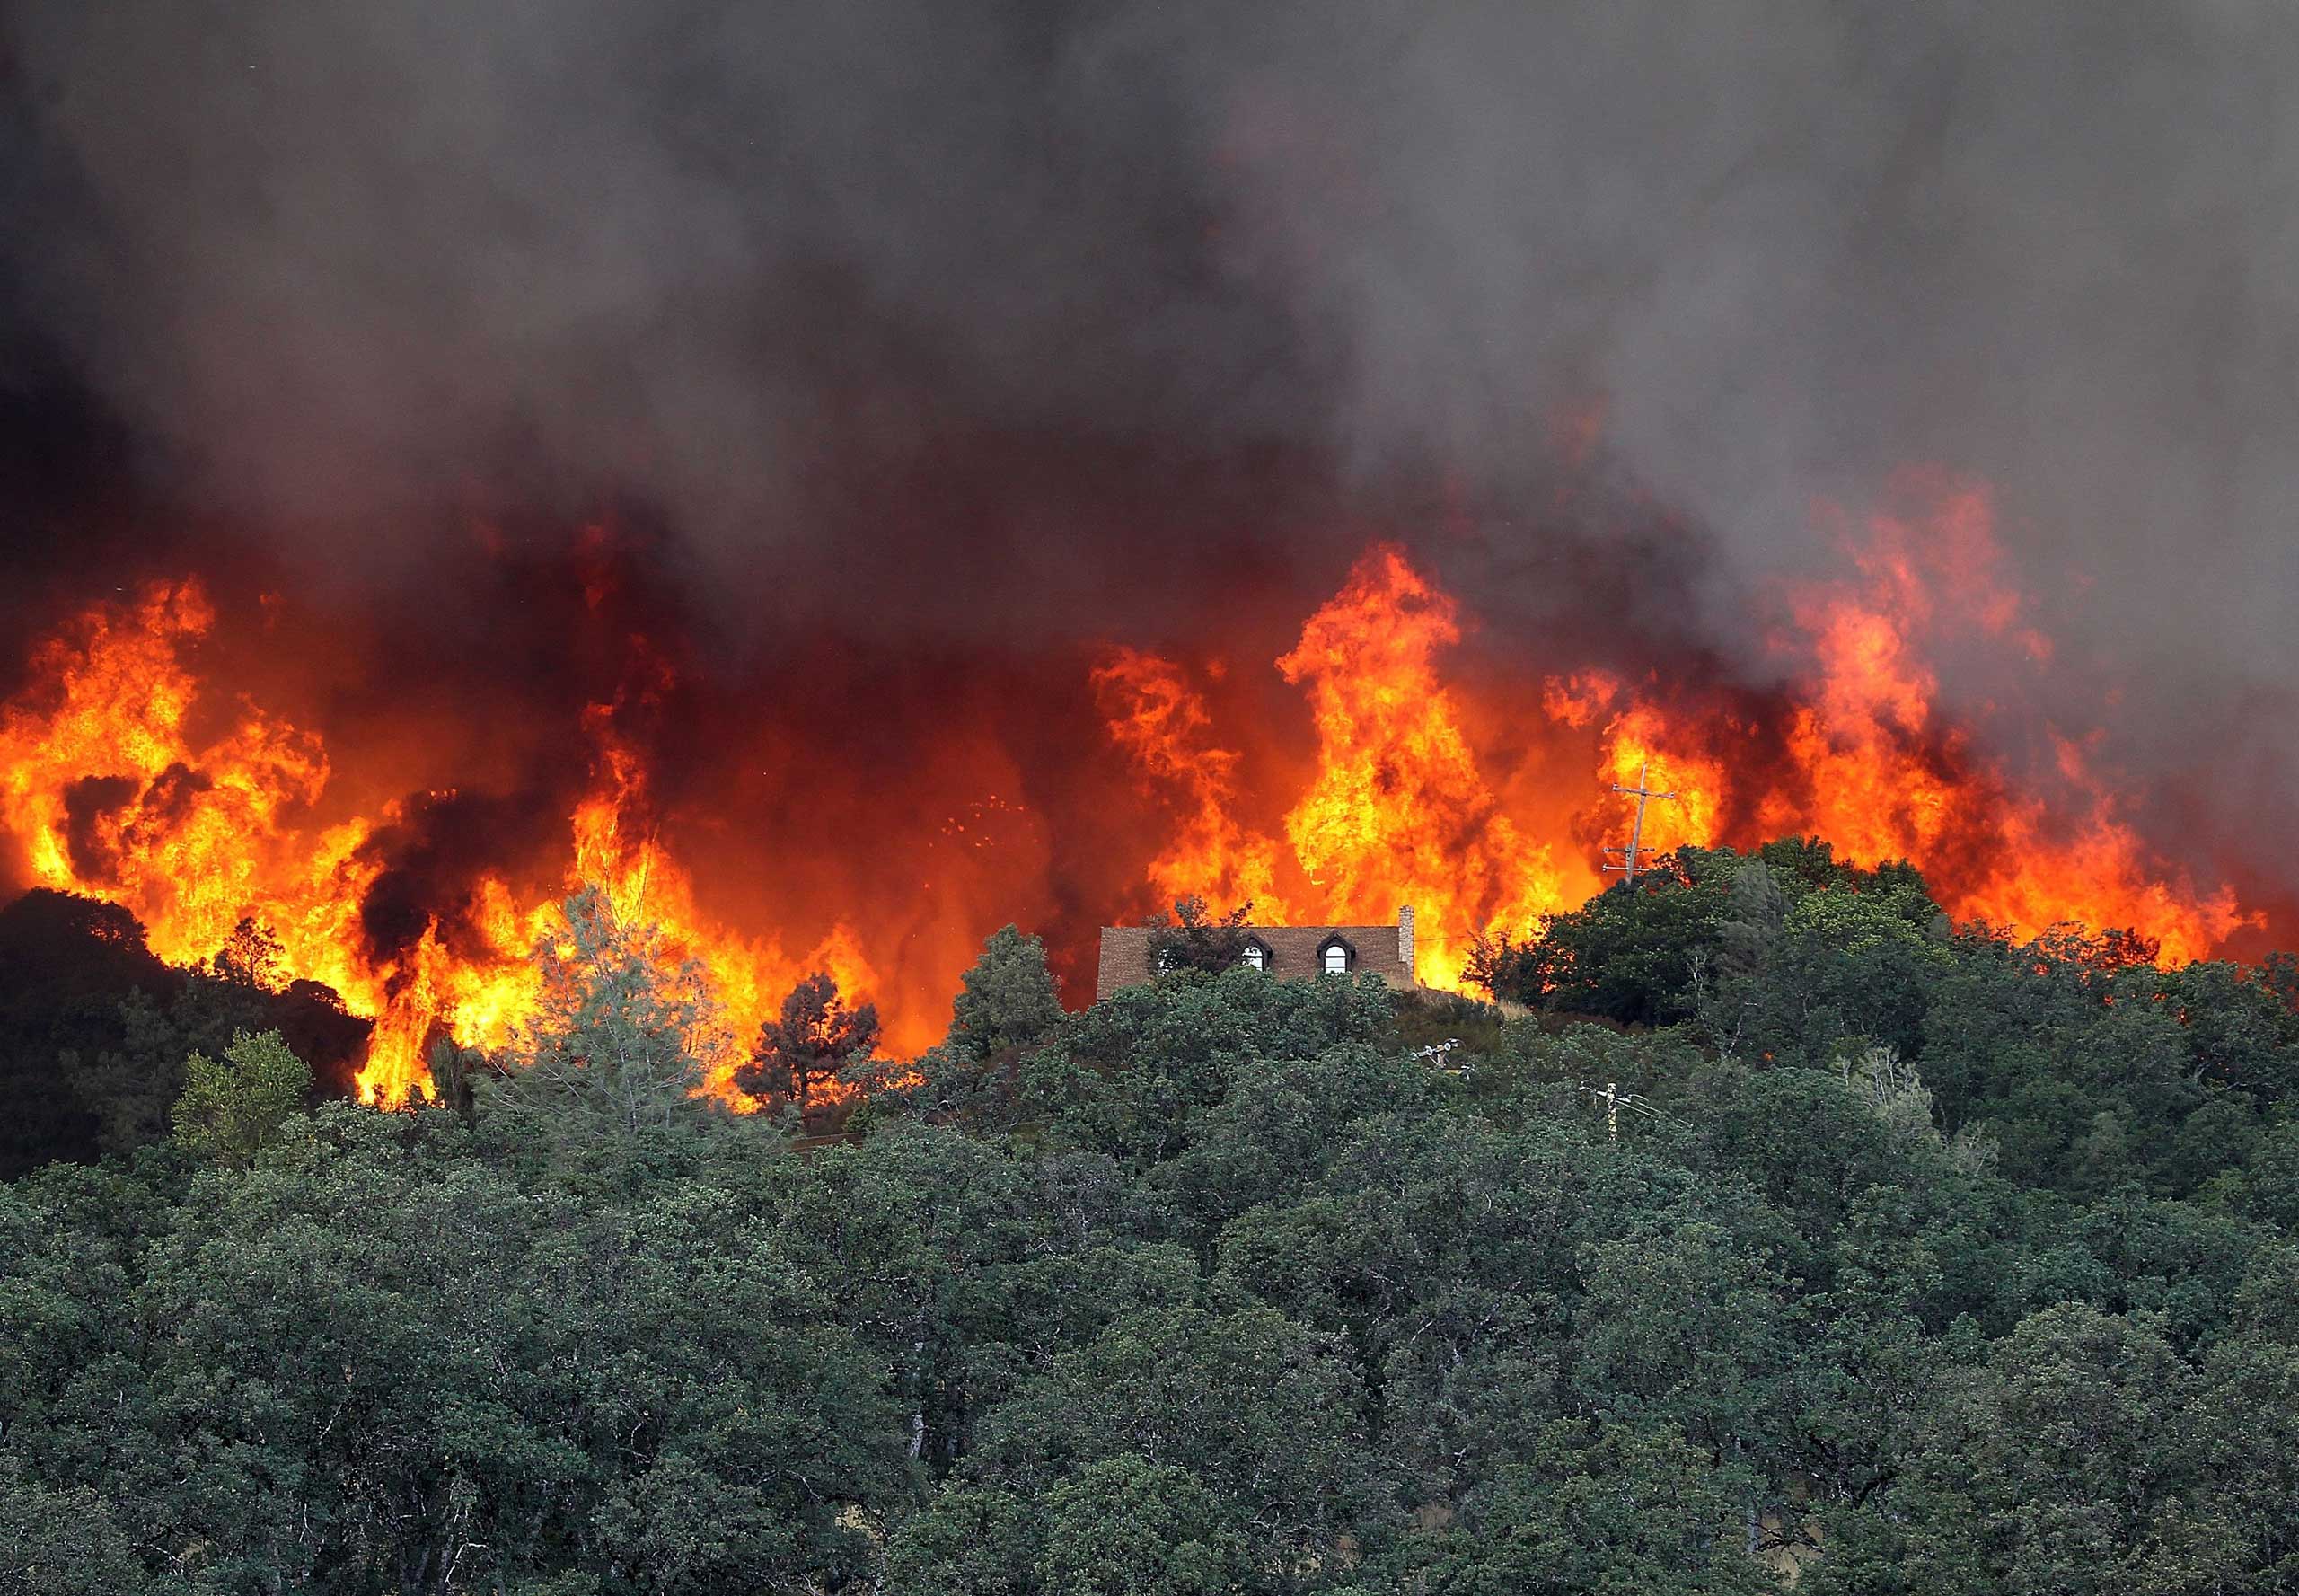 Flames from the Rocky Fire approach a house in Lower Lake, Calif. on July 31, 2015.